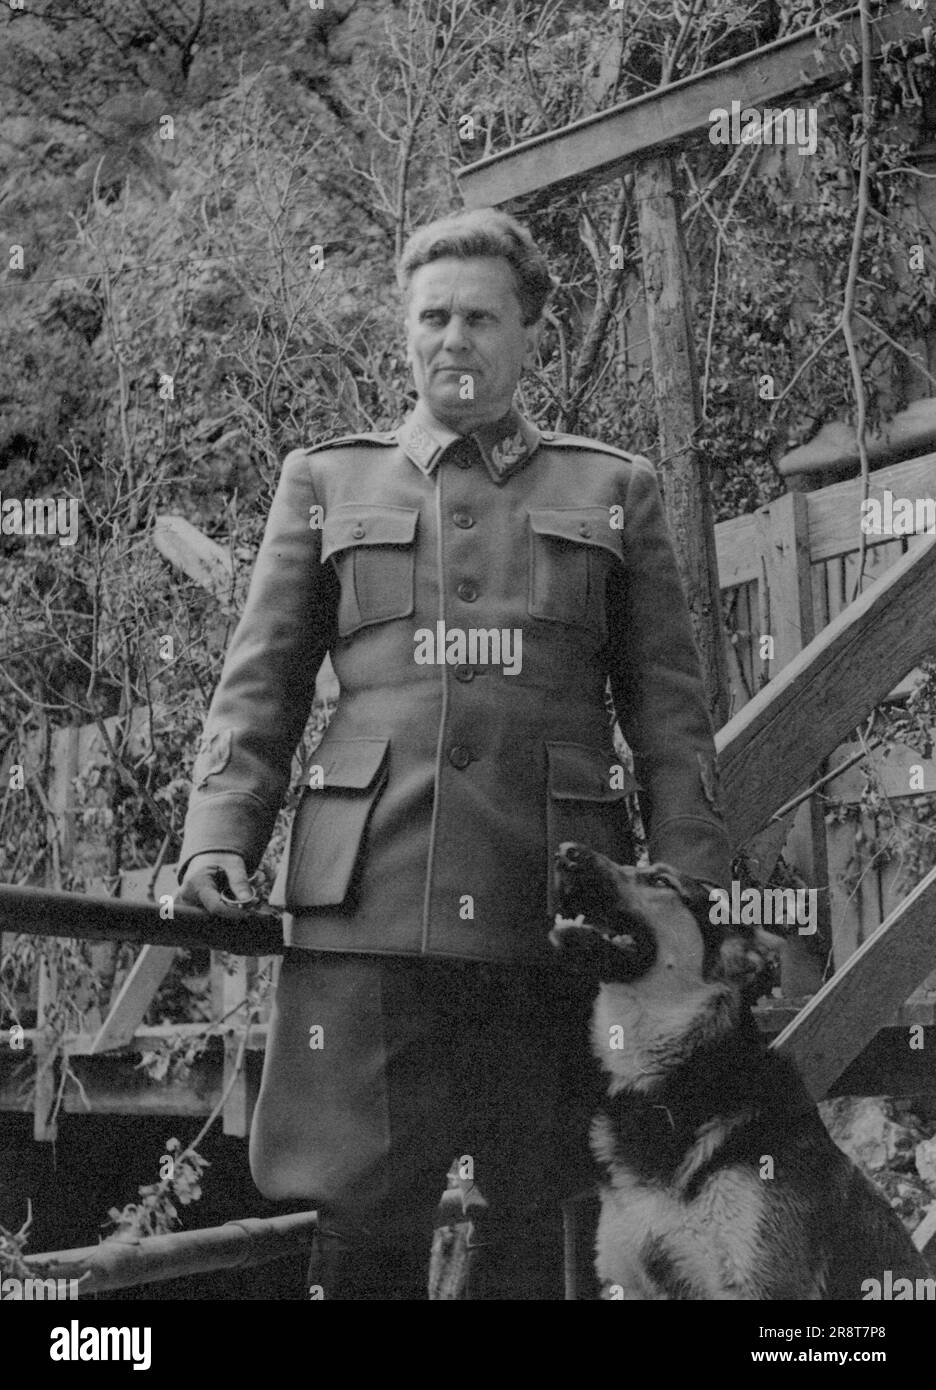 Marshal Tito's H.Q. : Marshal Tito with his favourite pet, a captured German police dog, which answers to the name of 'Tiger'. May 31, 1944. (Photo by British Official Photograph). Stock Photo